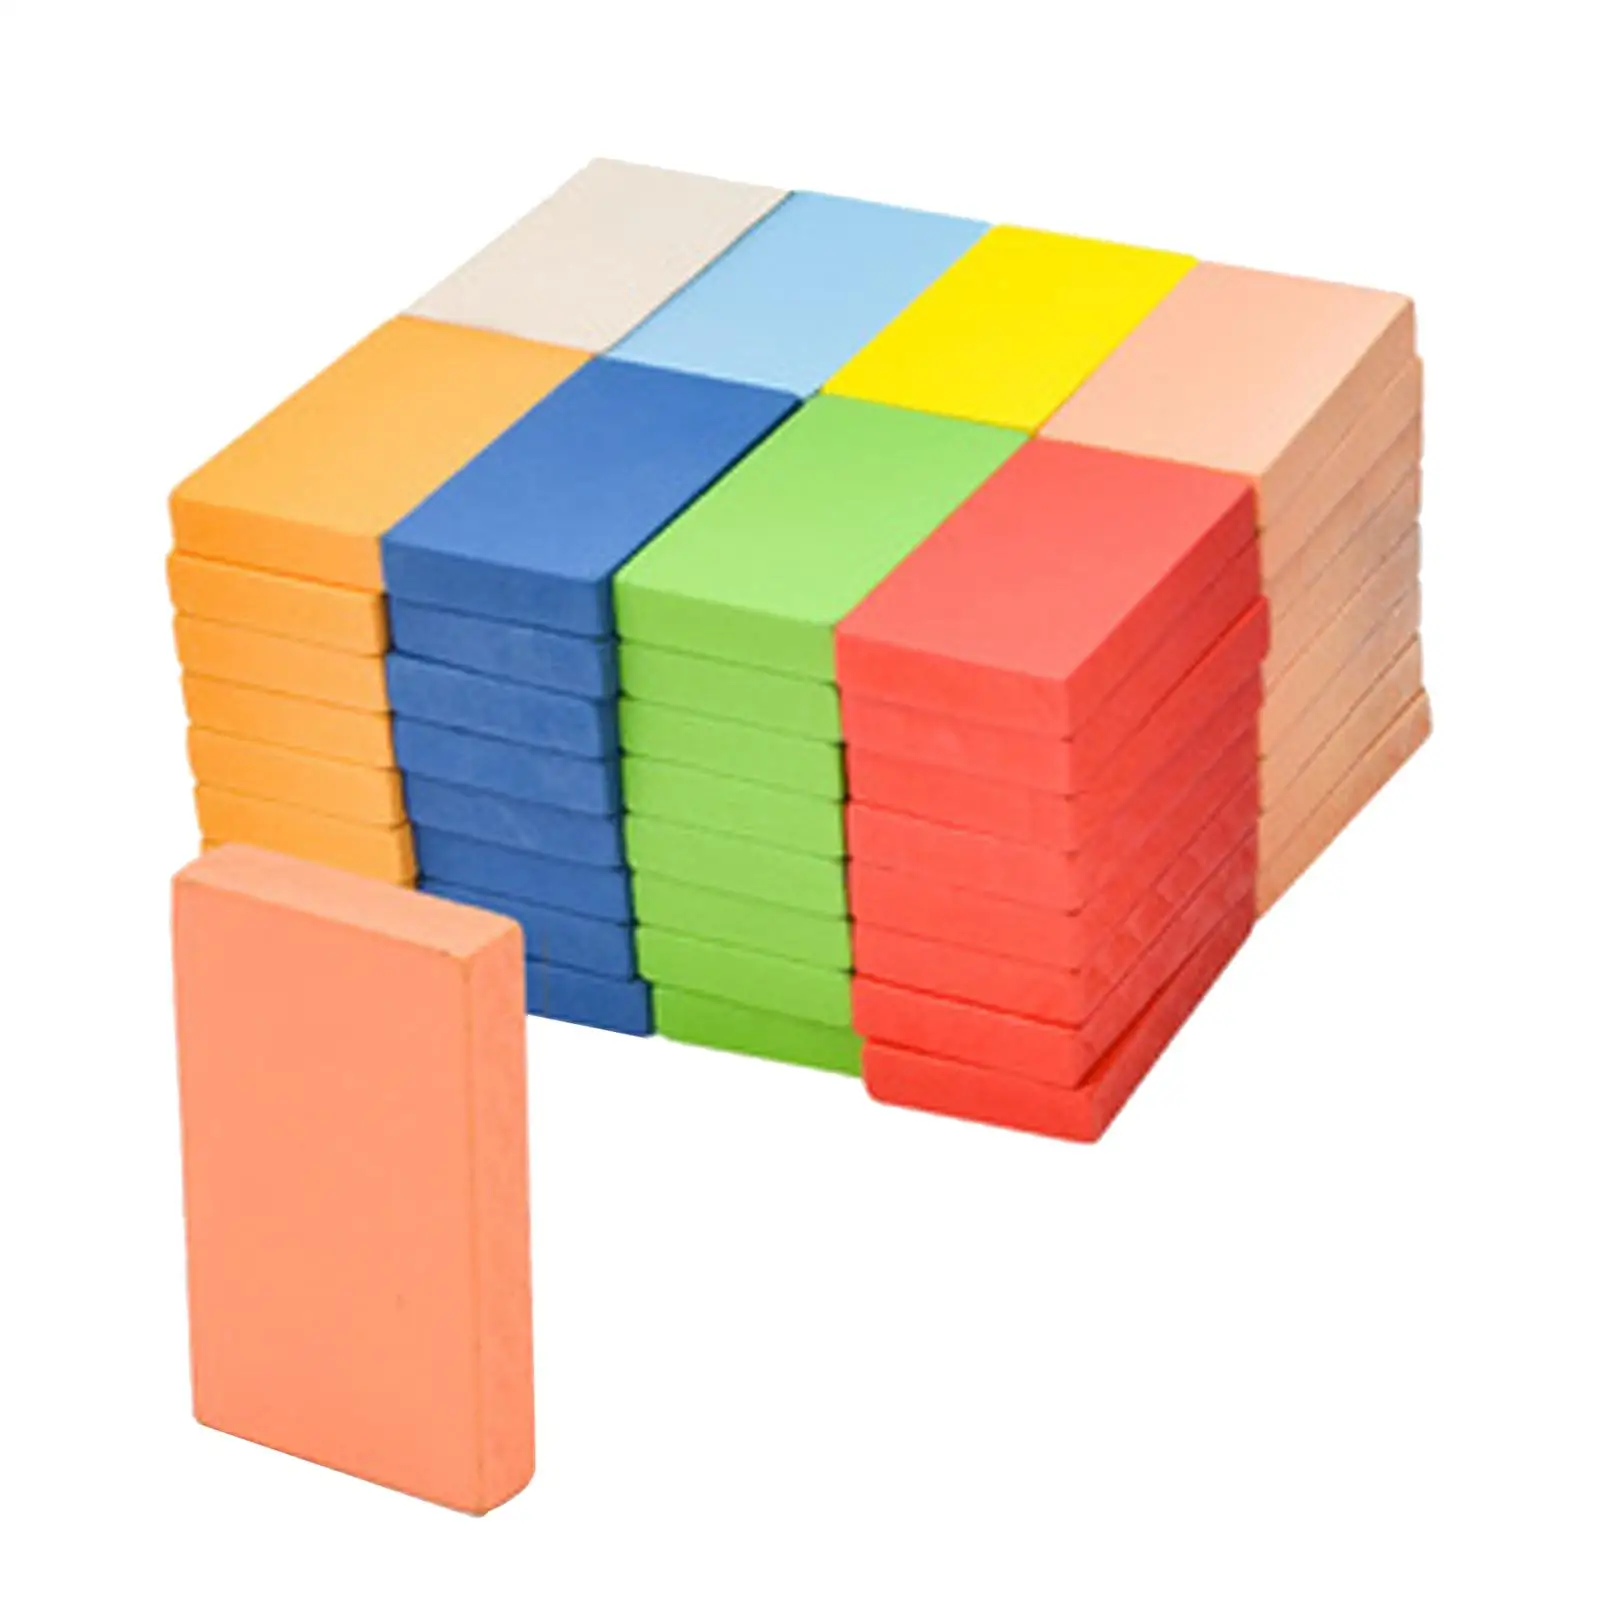 80x Colorful Wooden Building Blocks Kid Educational Toys Gift for Boys Girls